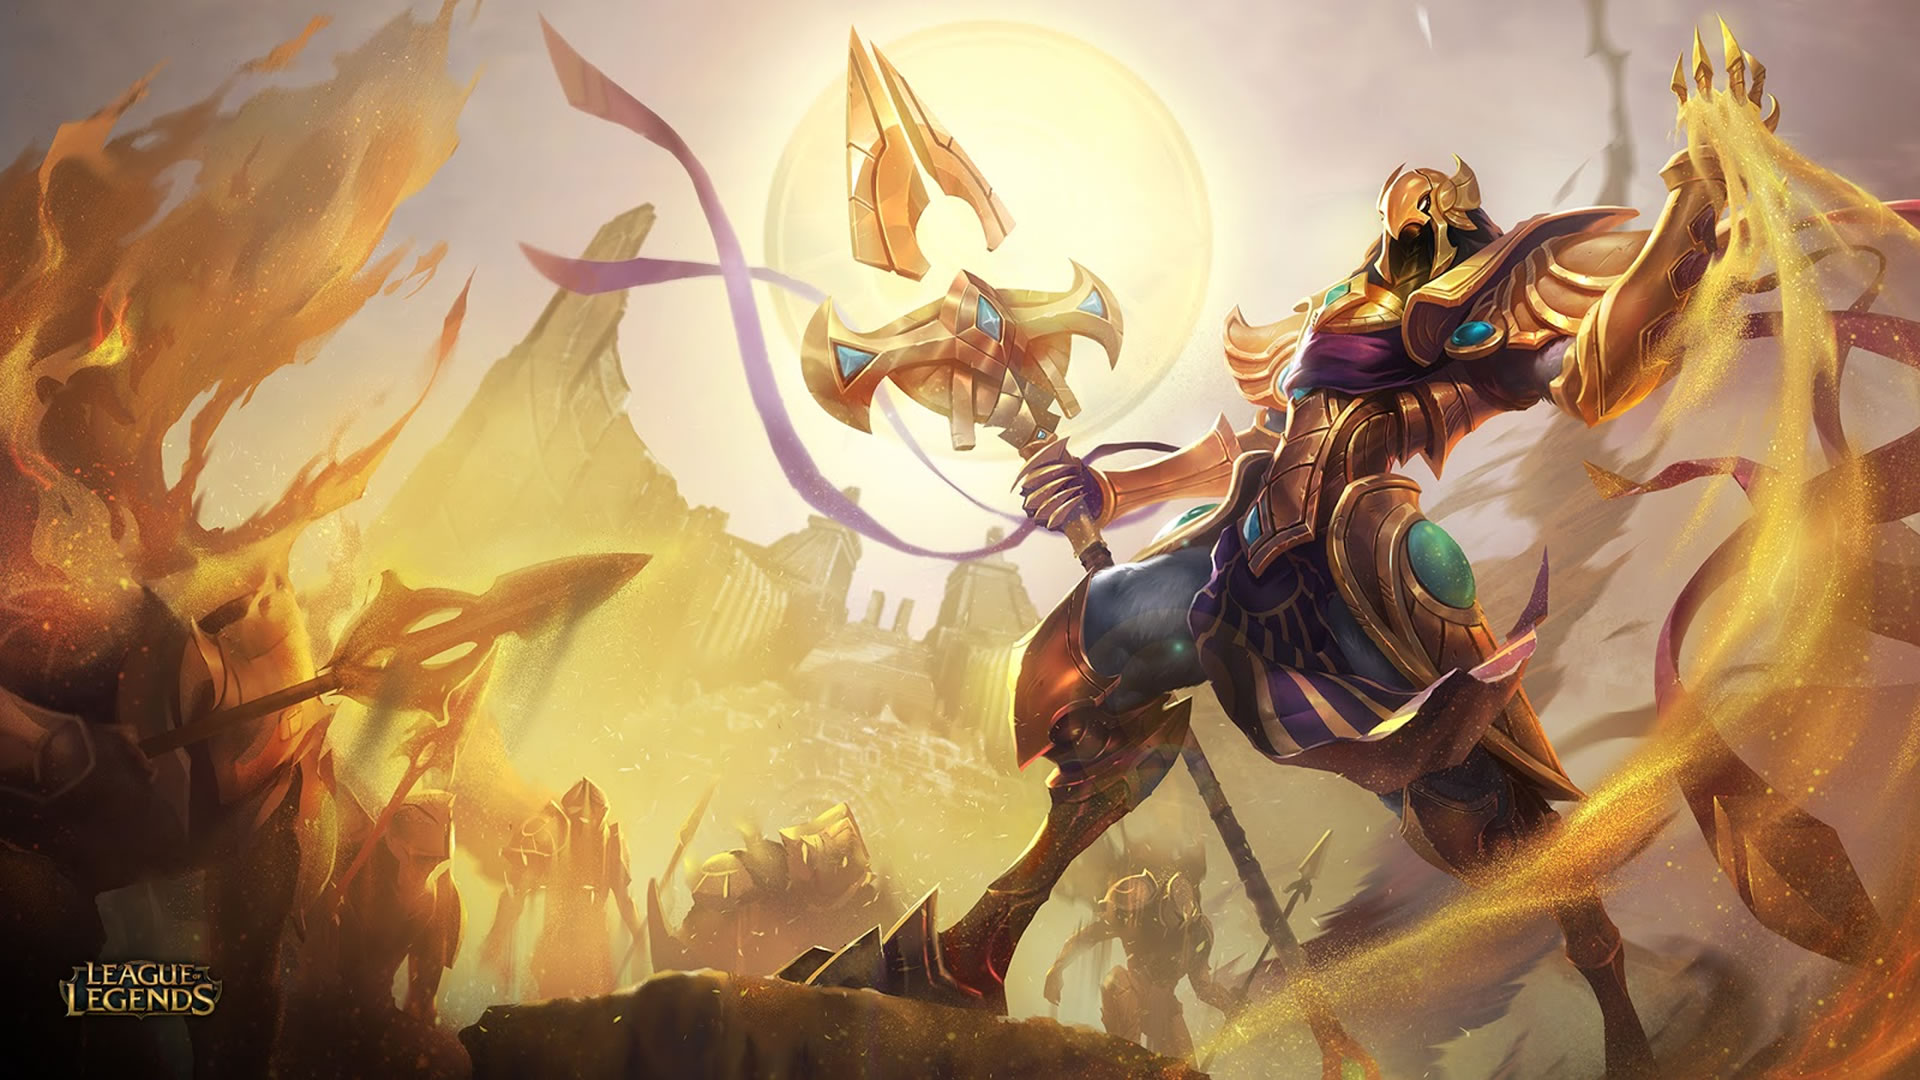 League of Legends skins, and artwork